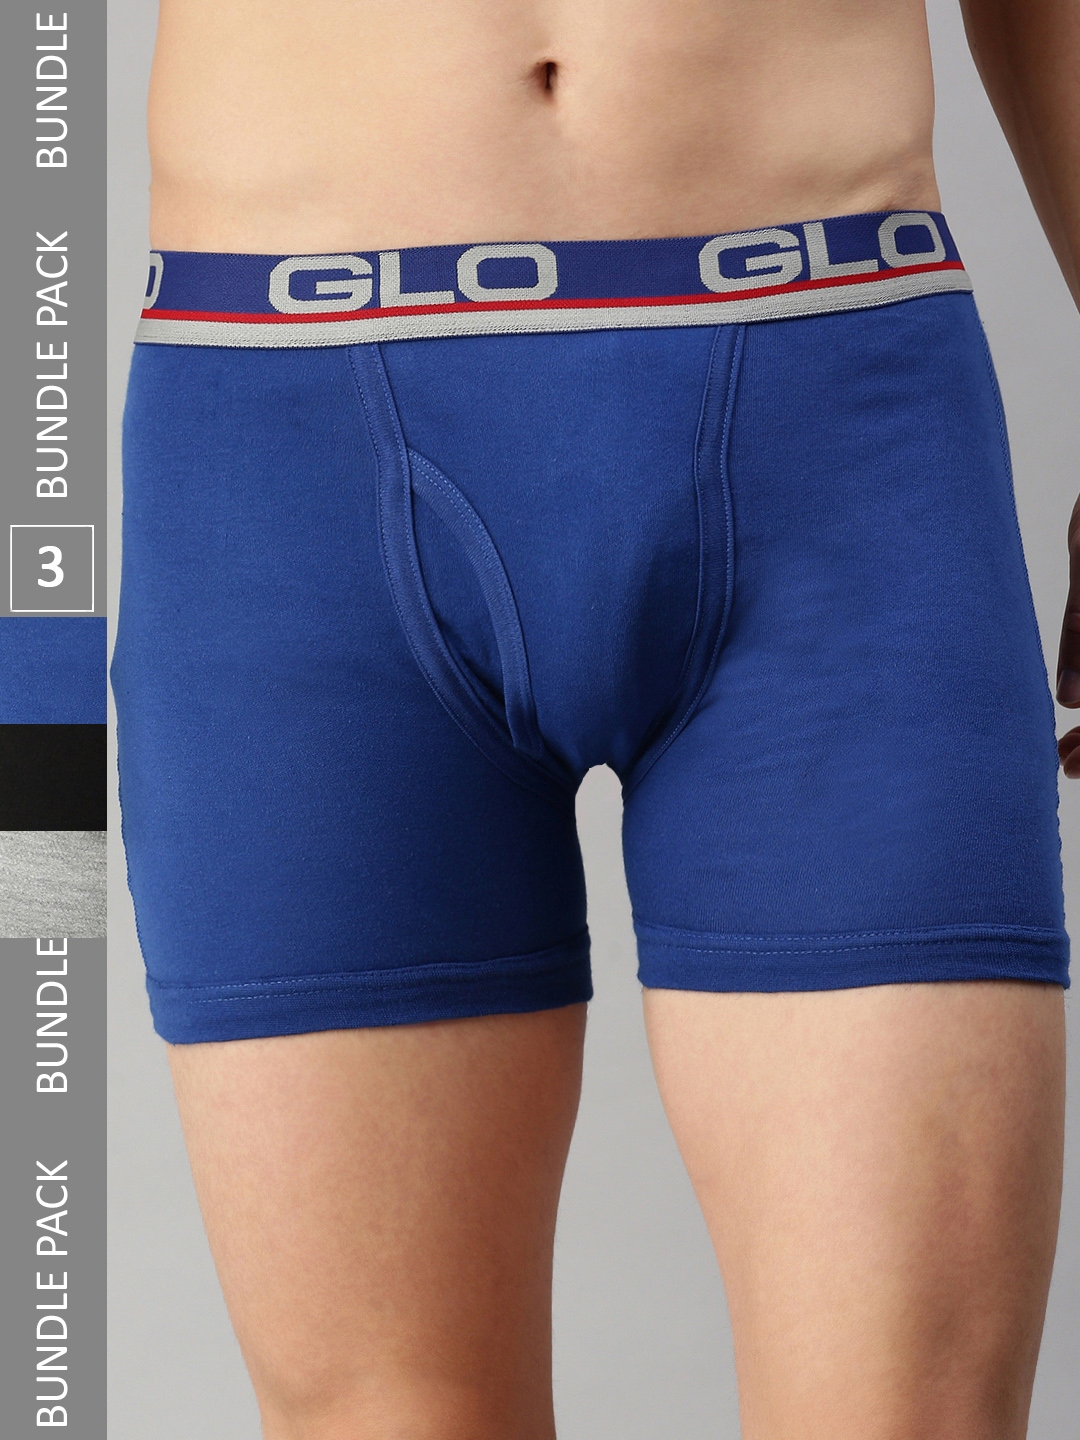 Buy Lux Venus Men's Assorted Solid 100% Cotton Pack of 3 Trunks